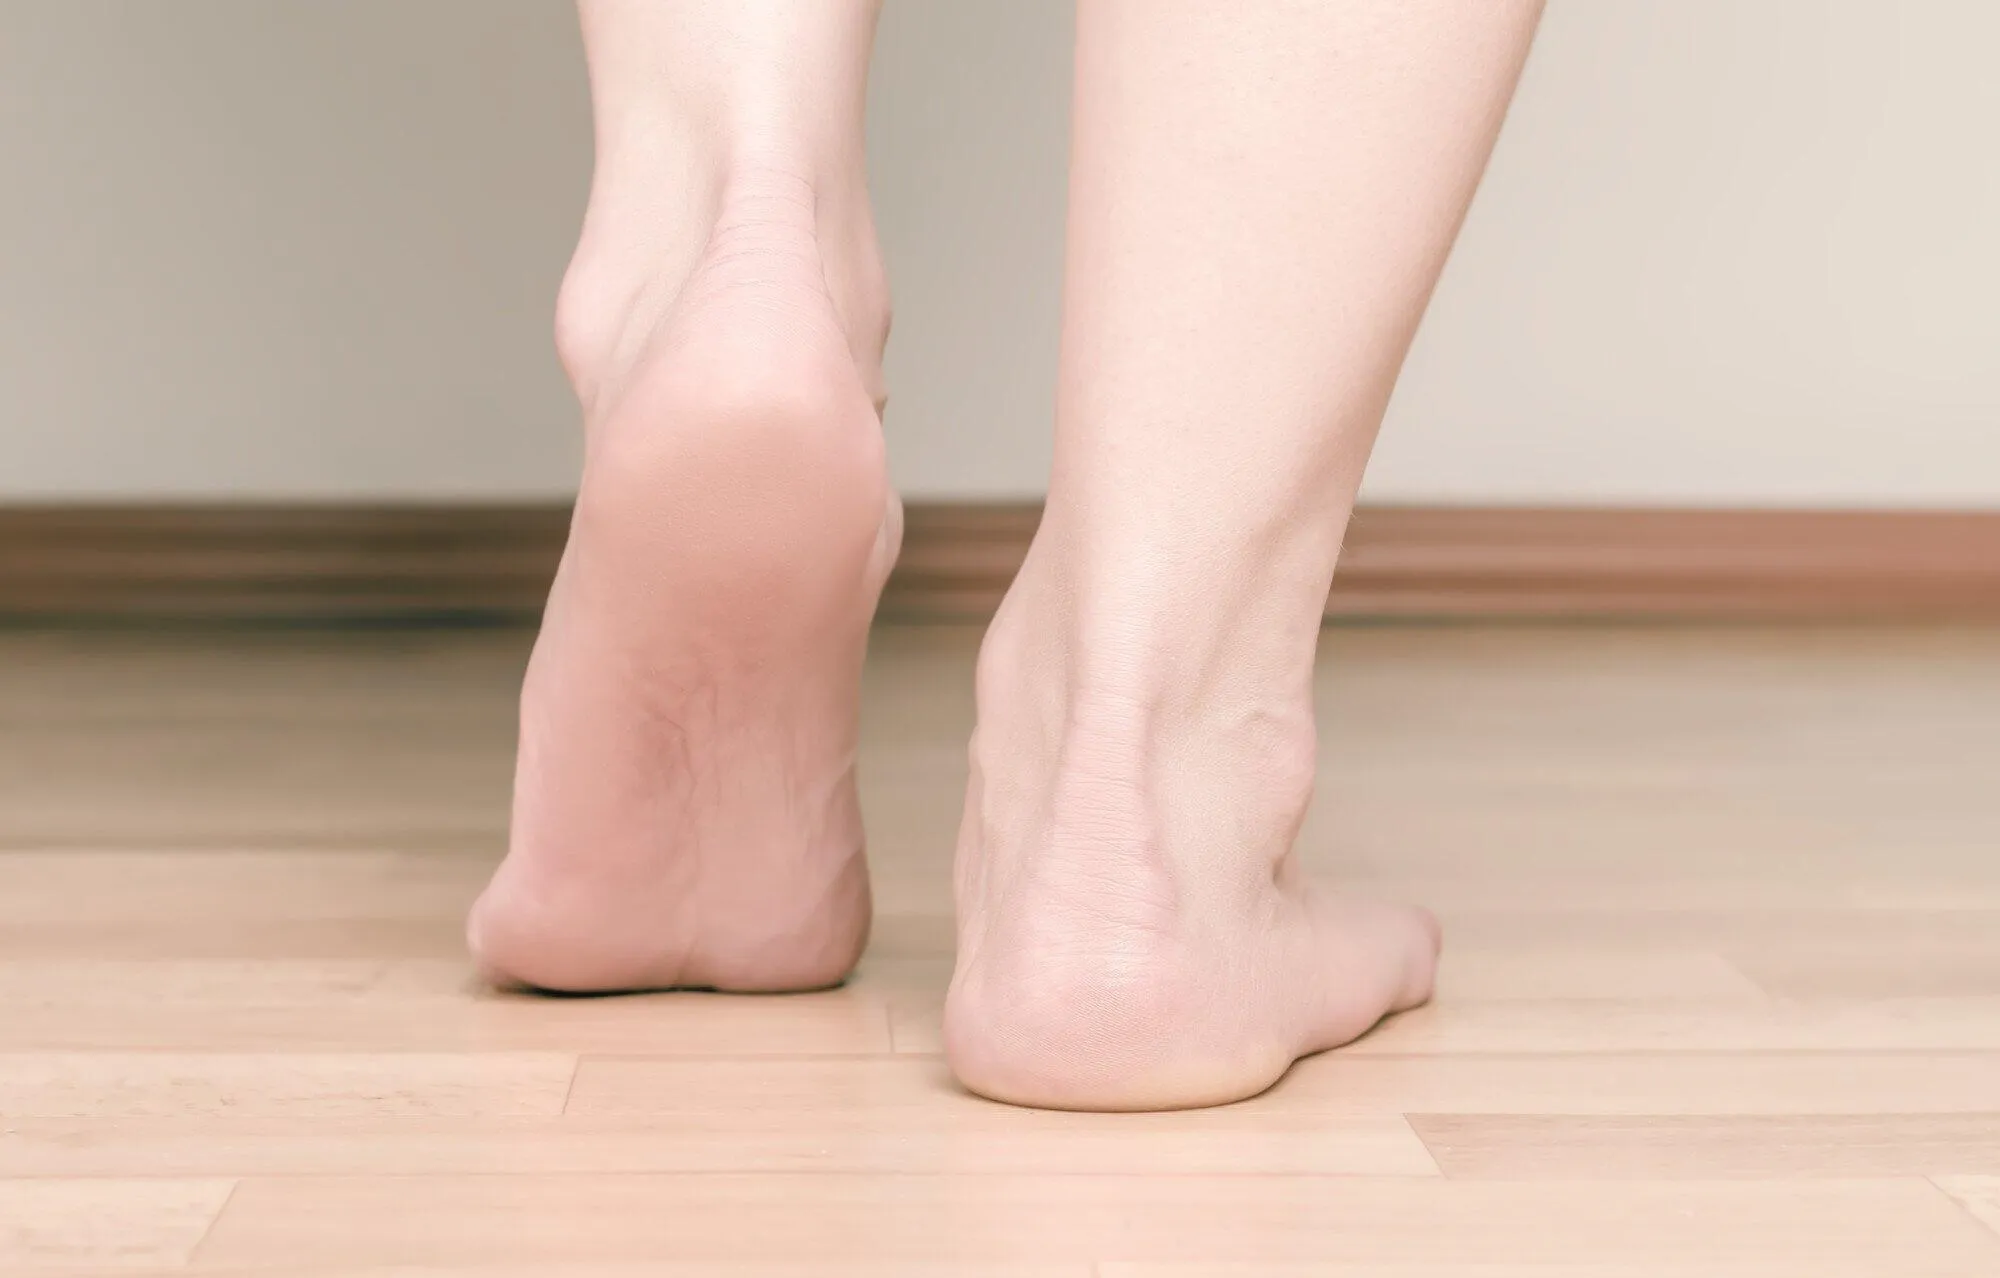 From Shoes to Orthotics: Finding the Right Flat Feet Support for You